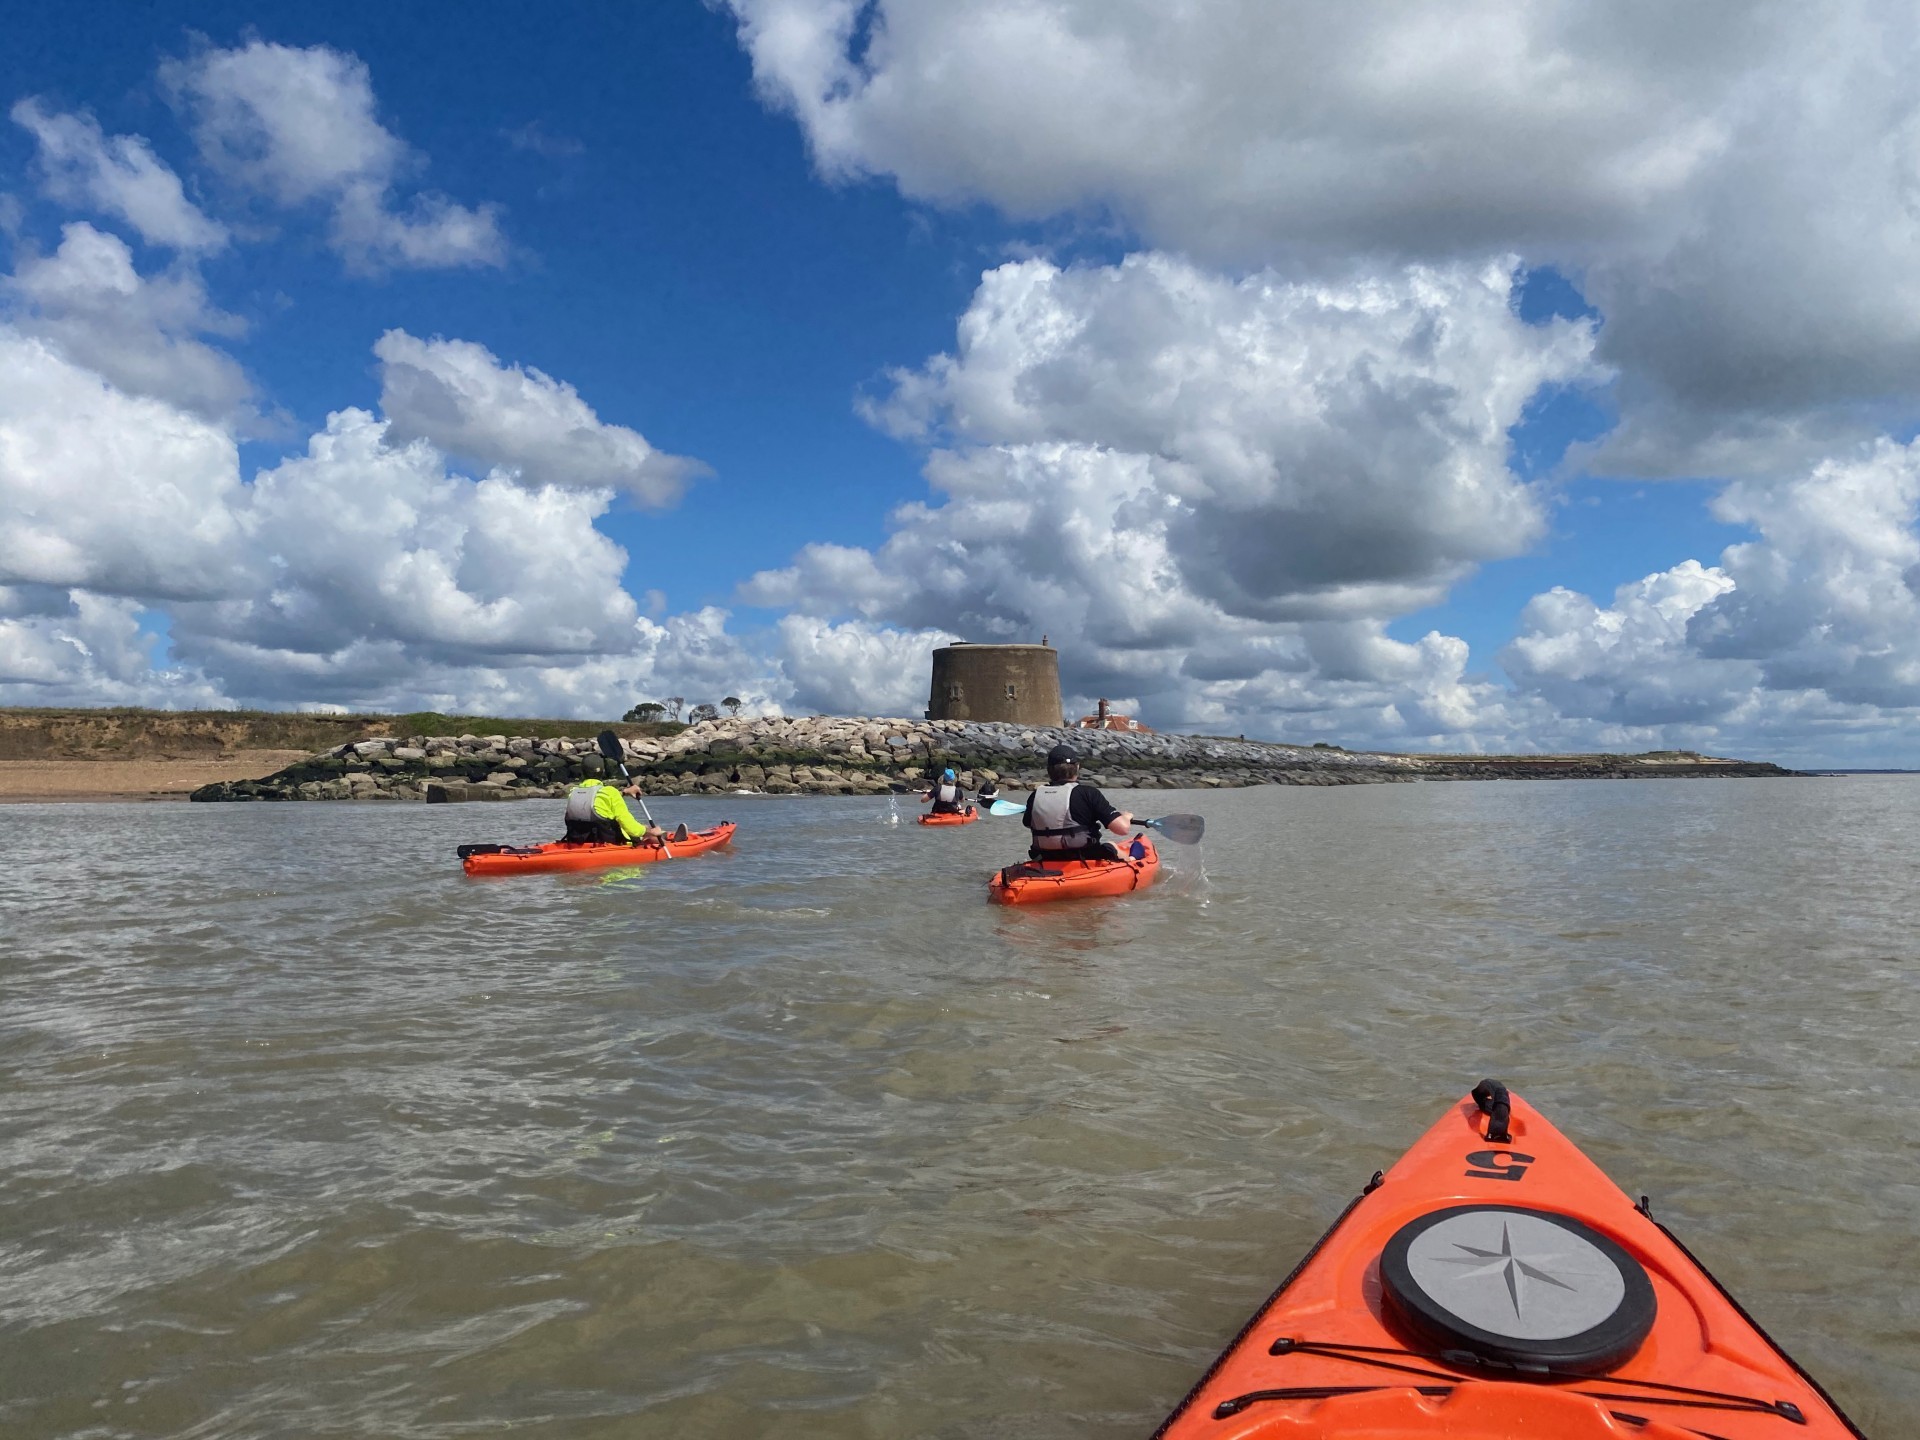 Martello tower in the distance on Suffolk kayaking and wild camping trip weekend